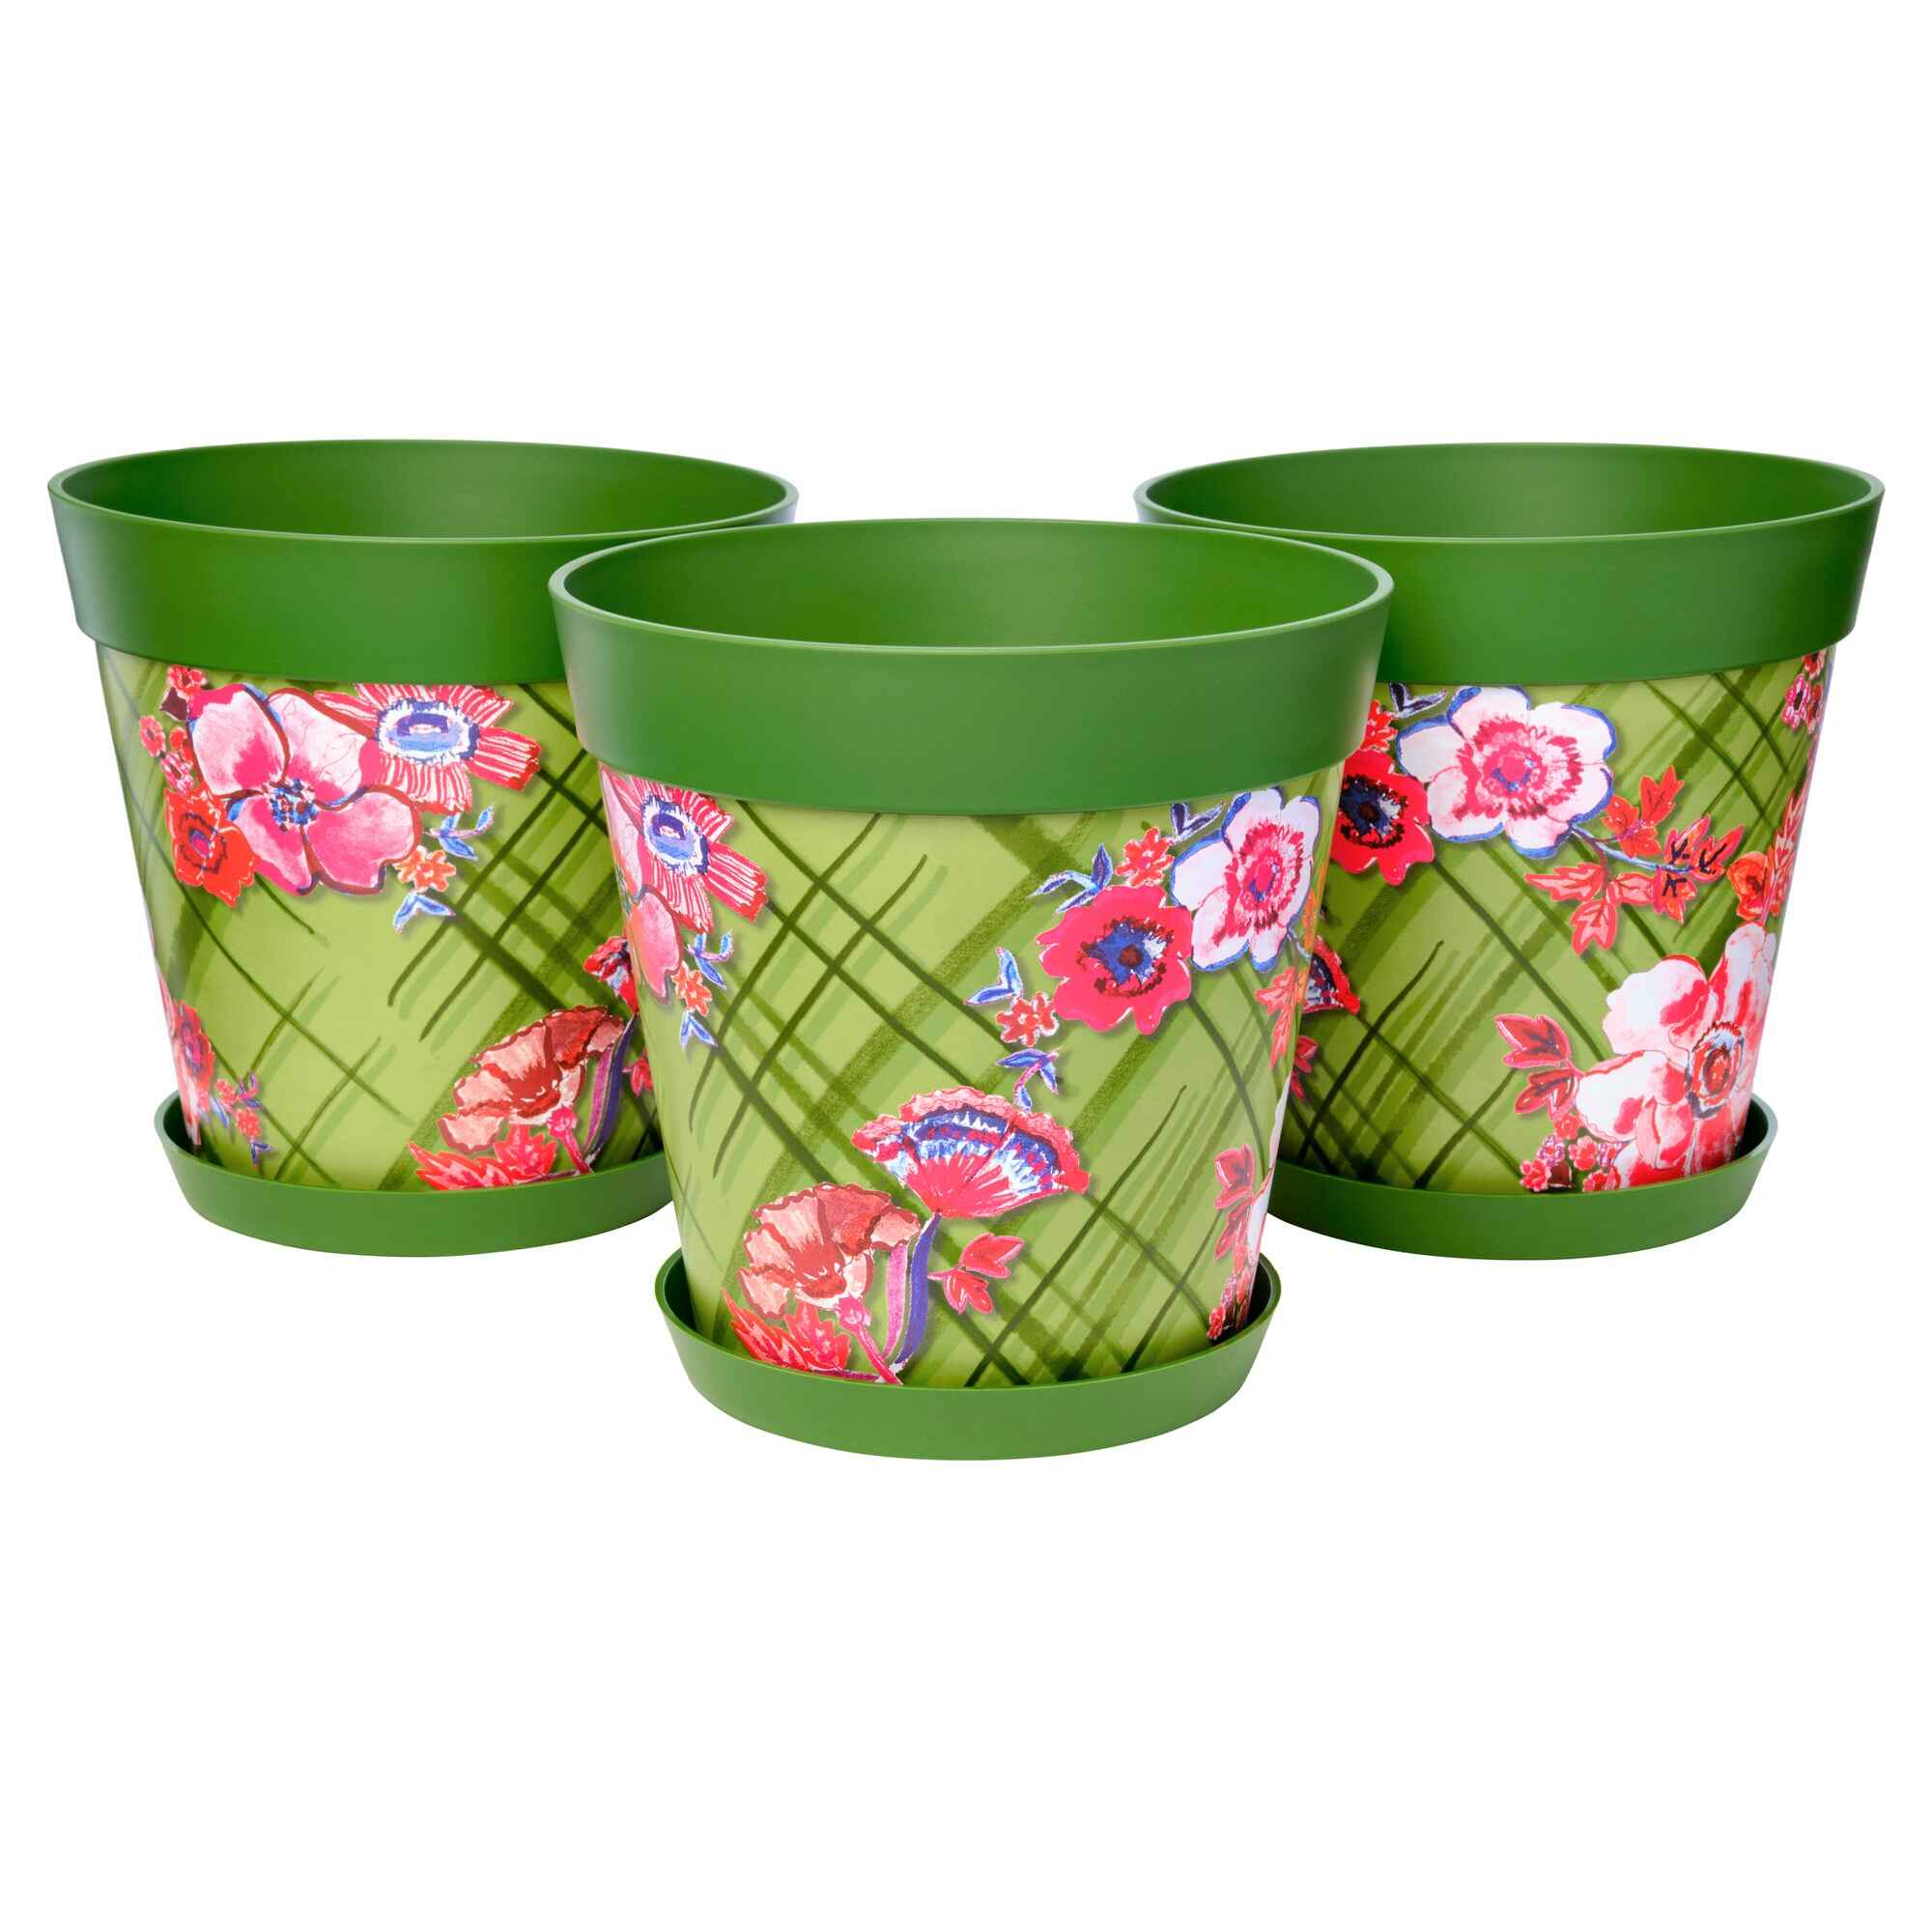 Picture of 3 Large 25cm Green Trellis Pattern Indoor/Outdoor Flower Pot and Saucers 